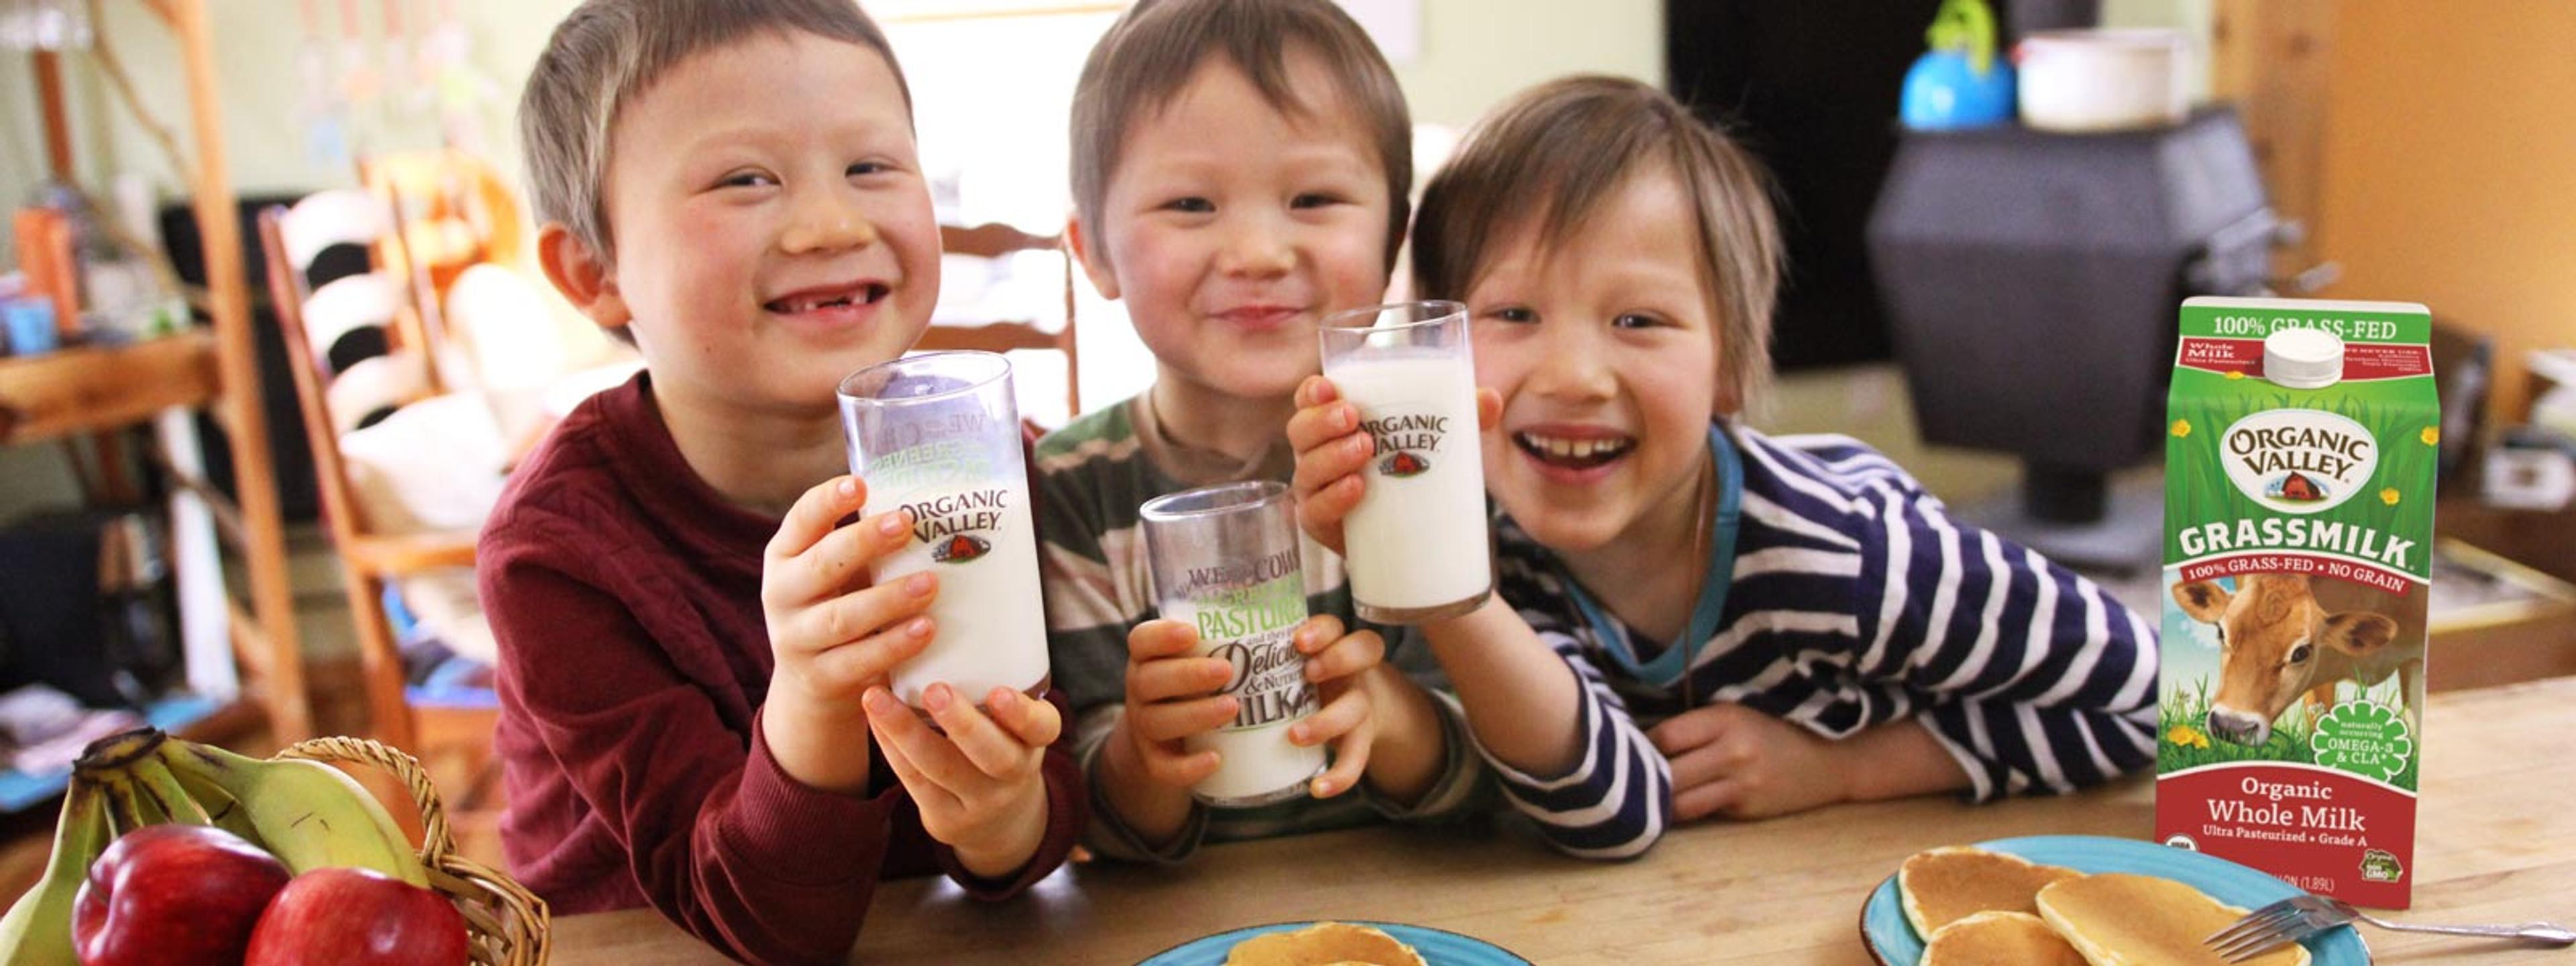 Asian children smile with glass of milk in hand.